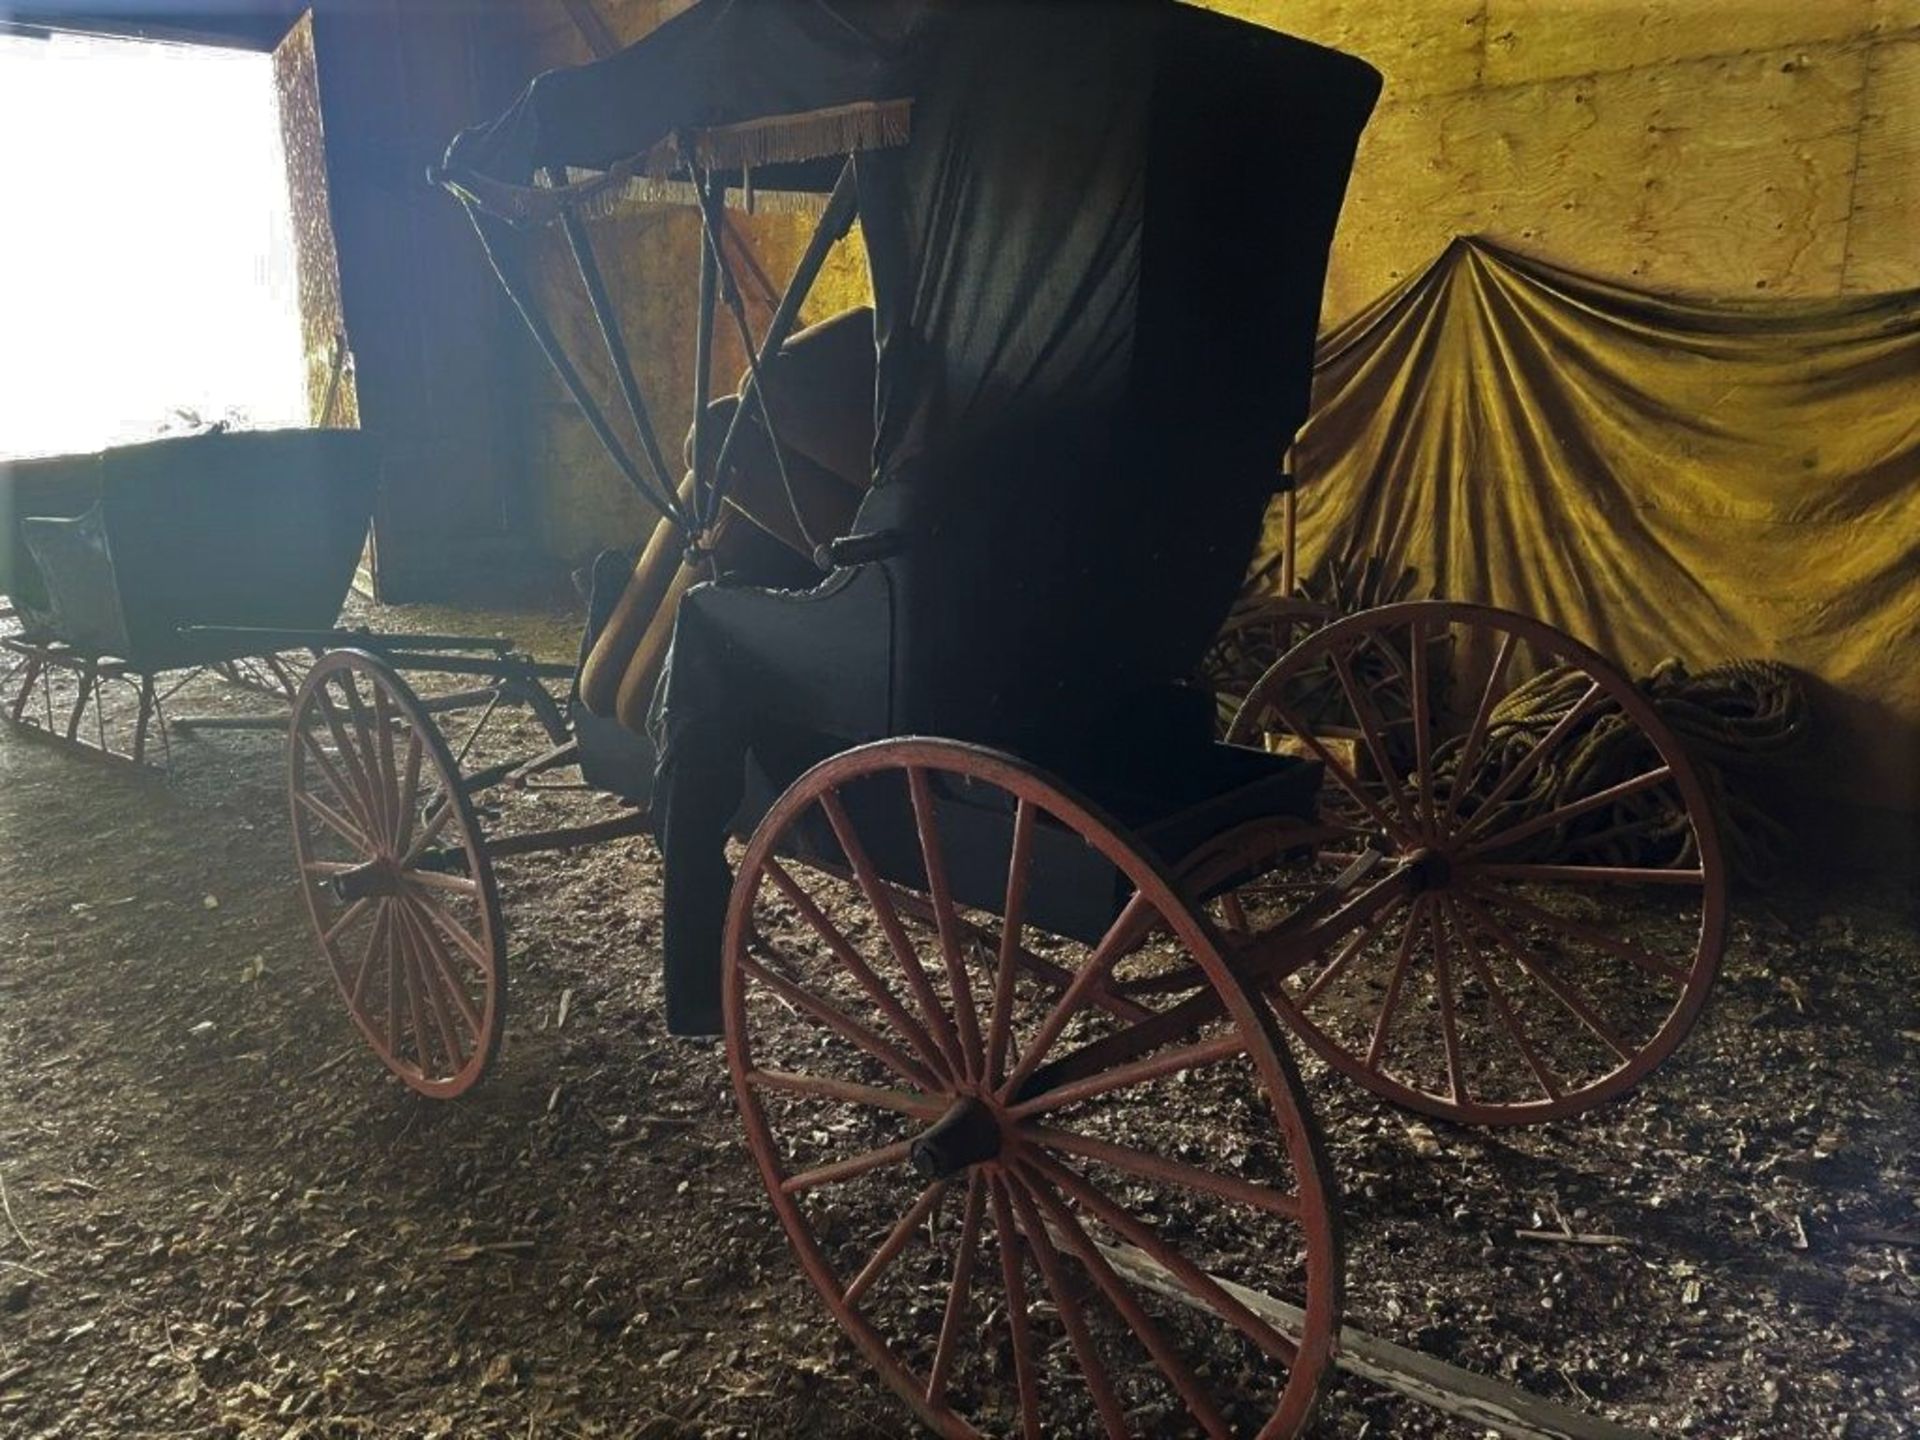 ANTIQUE HORSE DRAWN DOCTORS BUGGY (SAID TO BE ORIGINAL) - Image 6 of 7